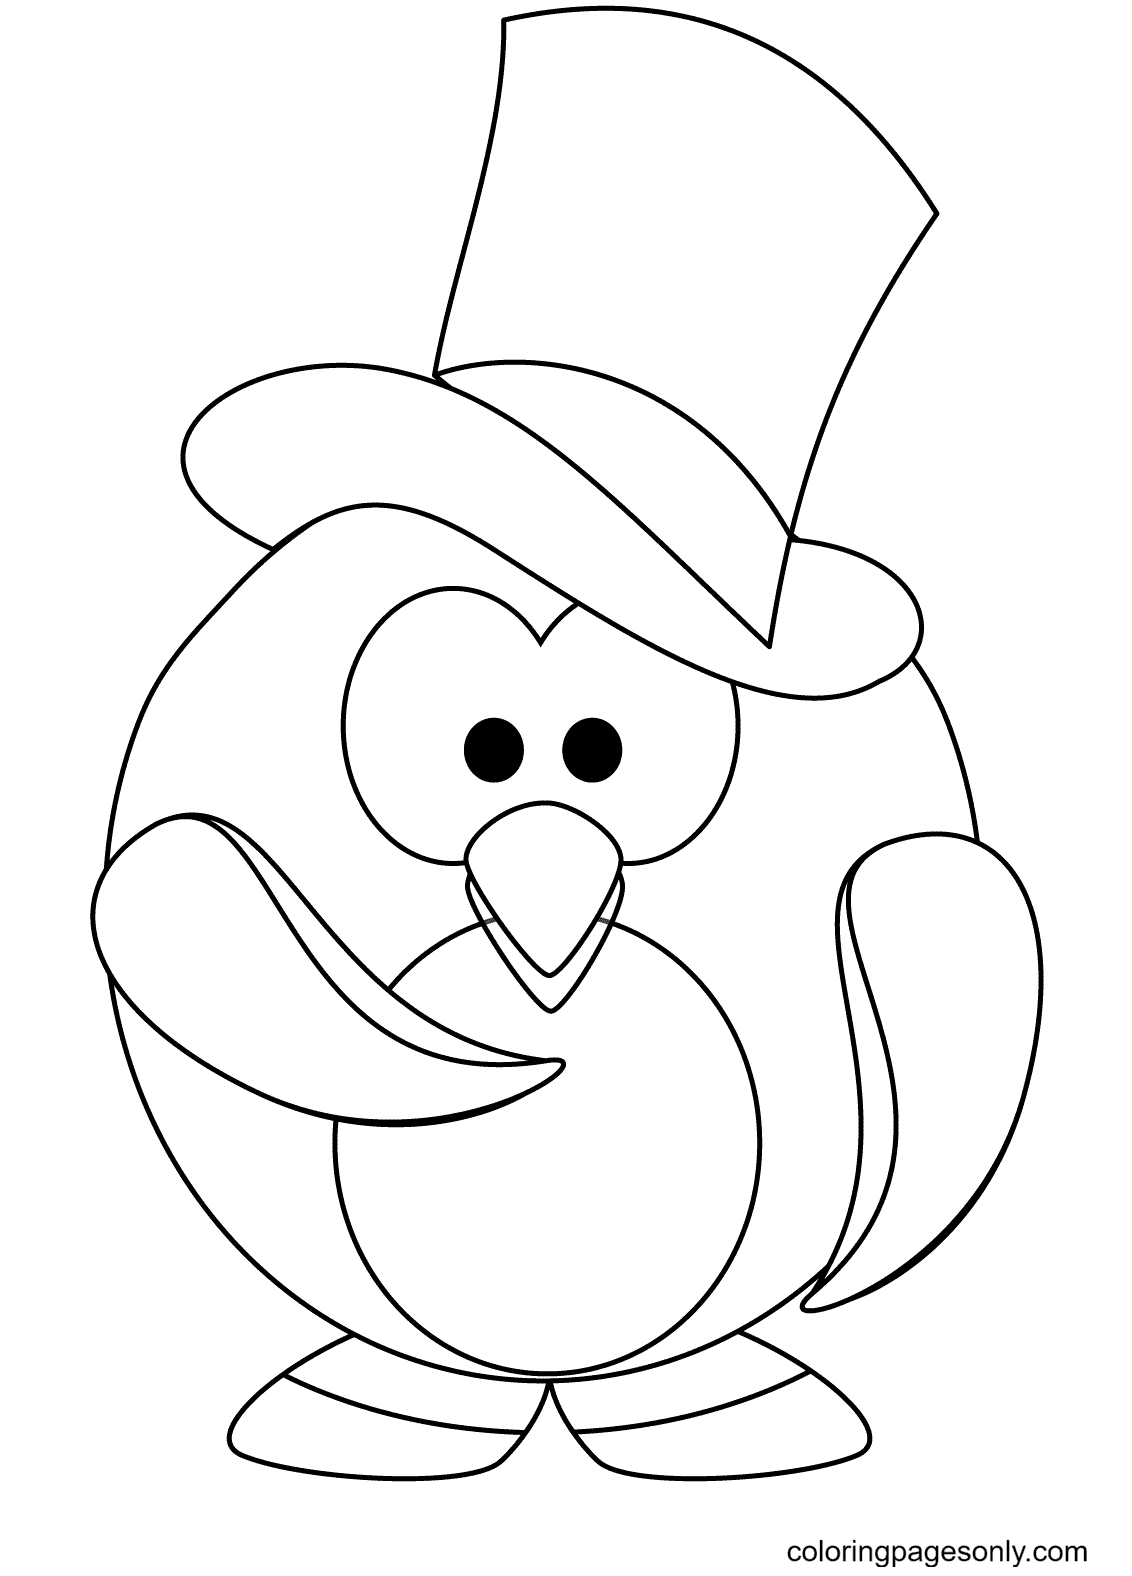 The Gentleman Penguin Coloring Pages